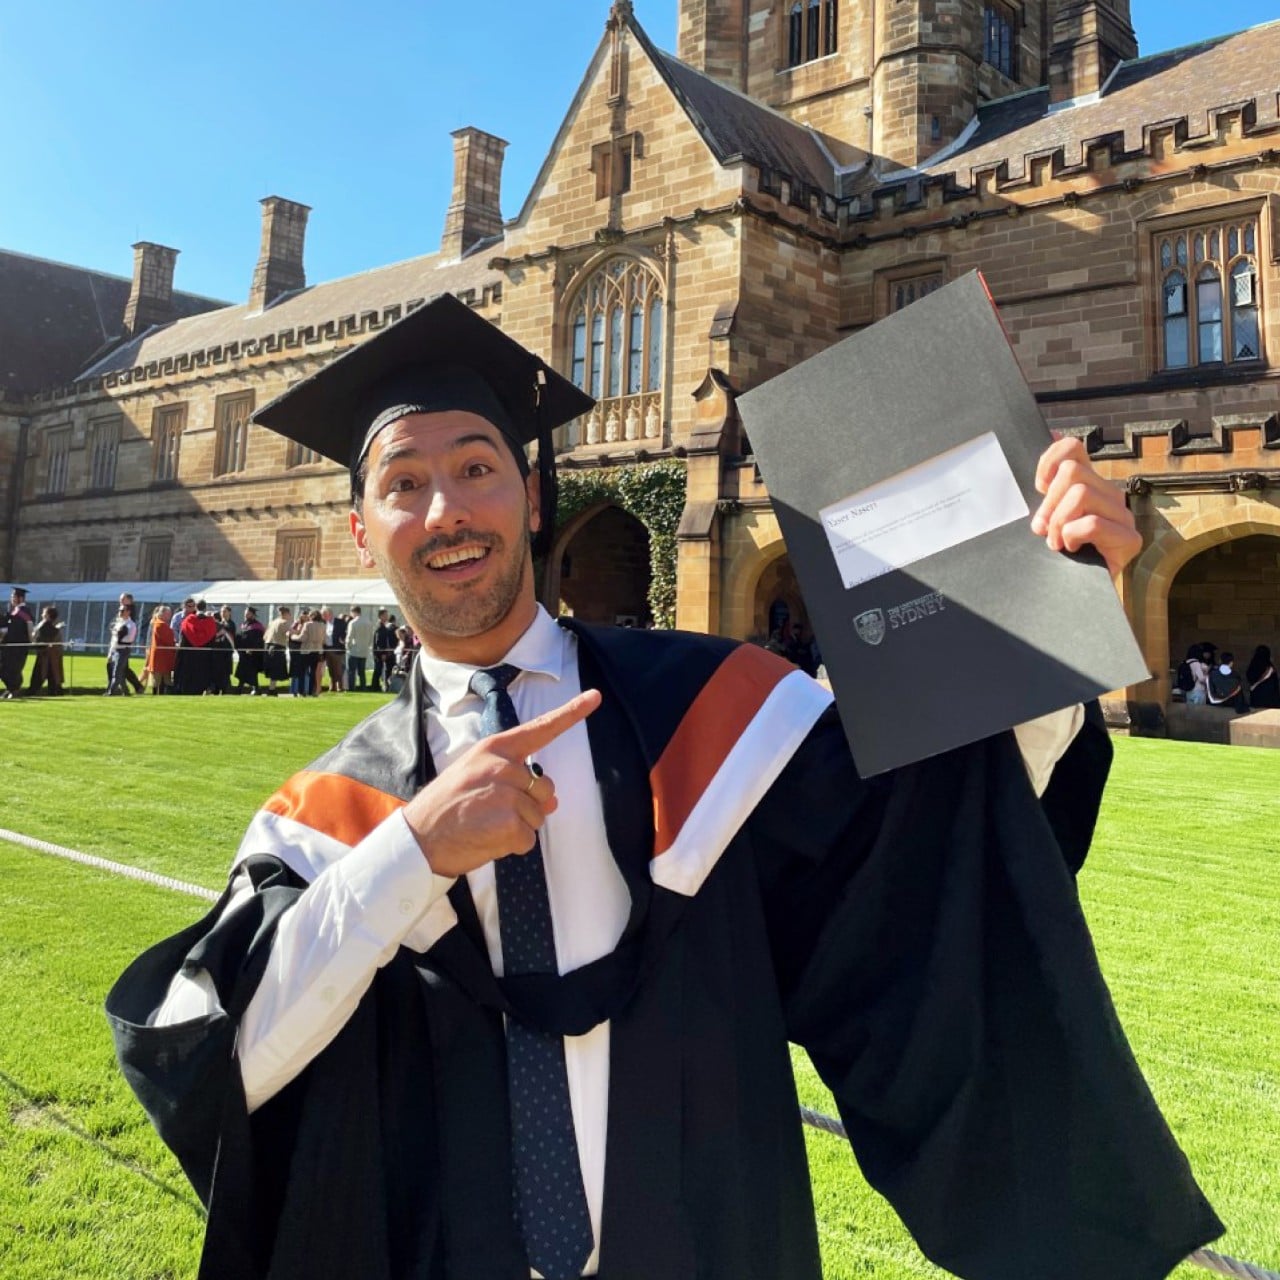 Yaser in his graduation gown holds up his degree certificate, standing on the grass in the University of Sydney's Main Quadrangle.